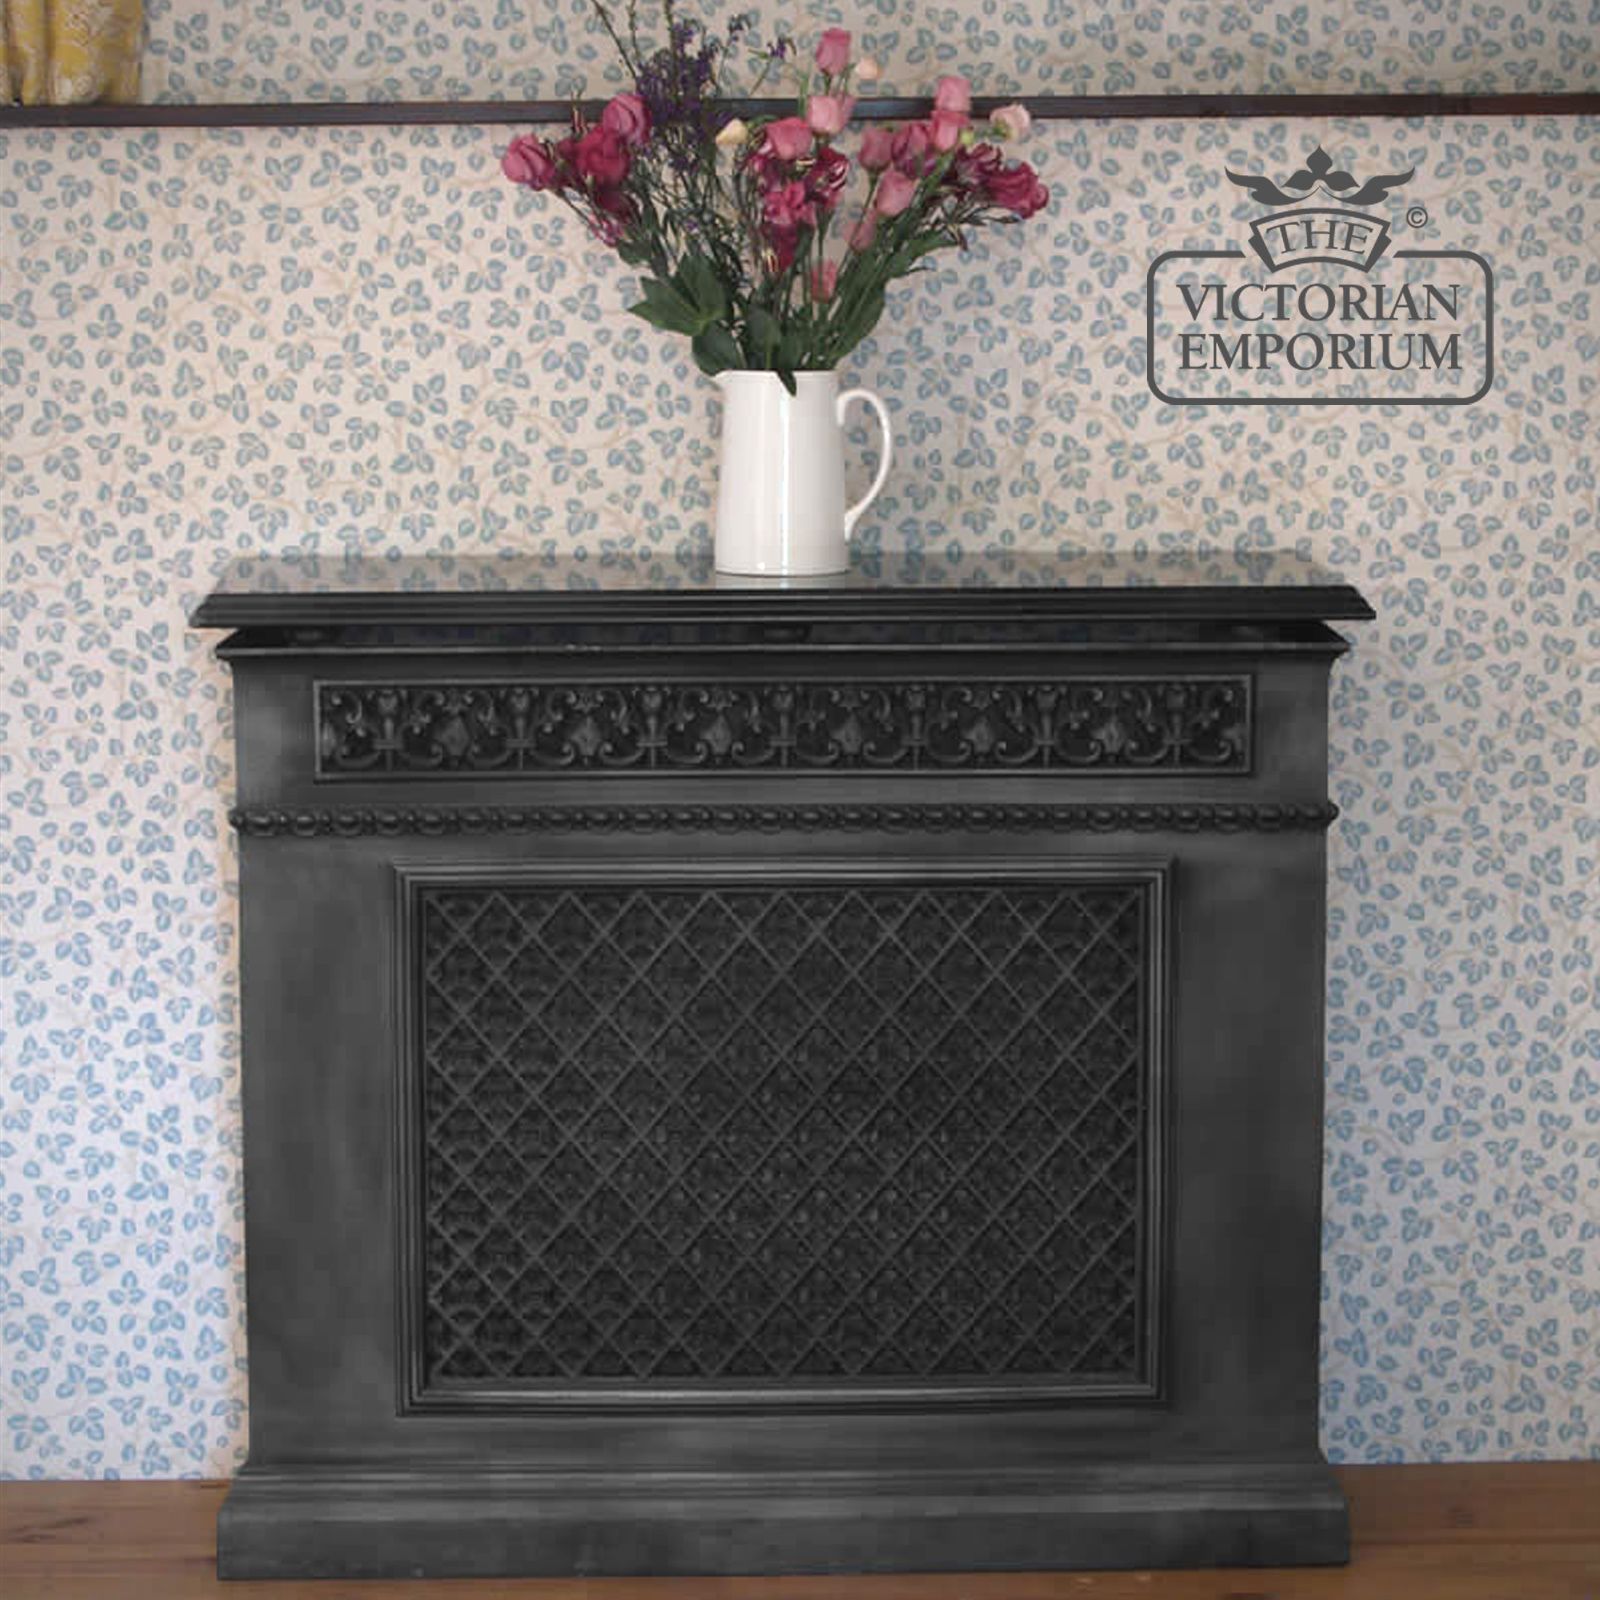 Cast Iron Fireplace Cover Fresh Decorative Cast Iron 1 Panel Radiator Cover with Criss Cross Design